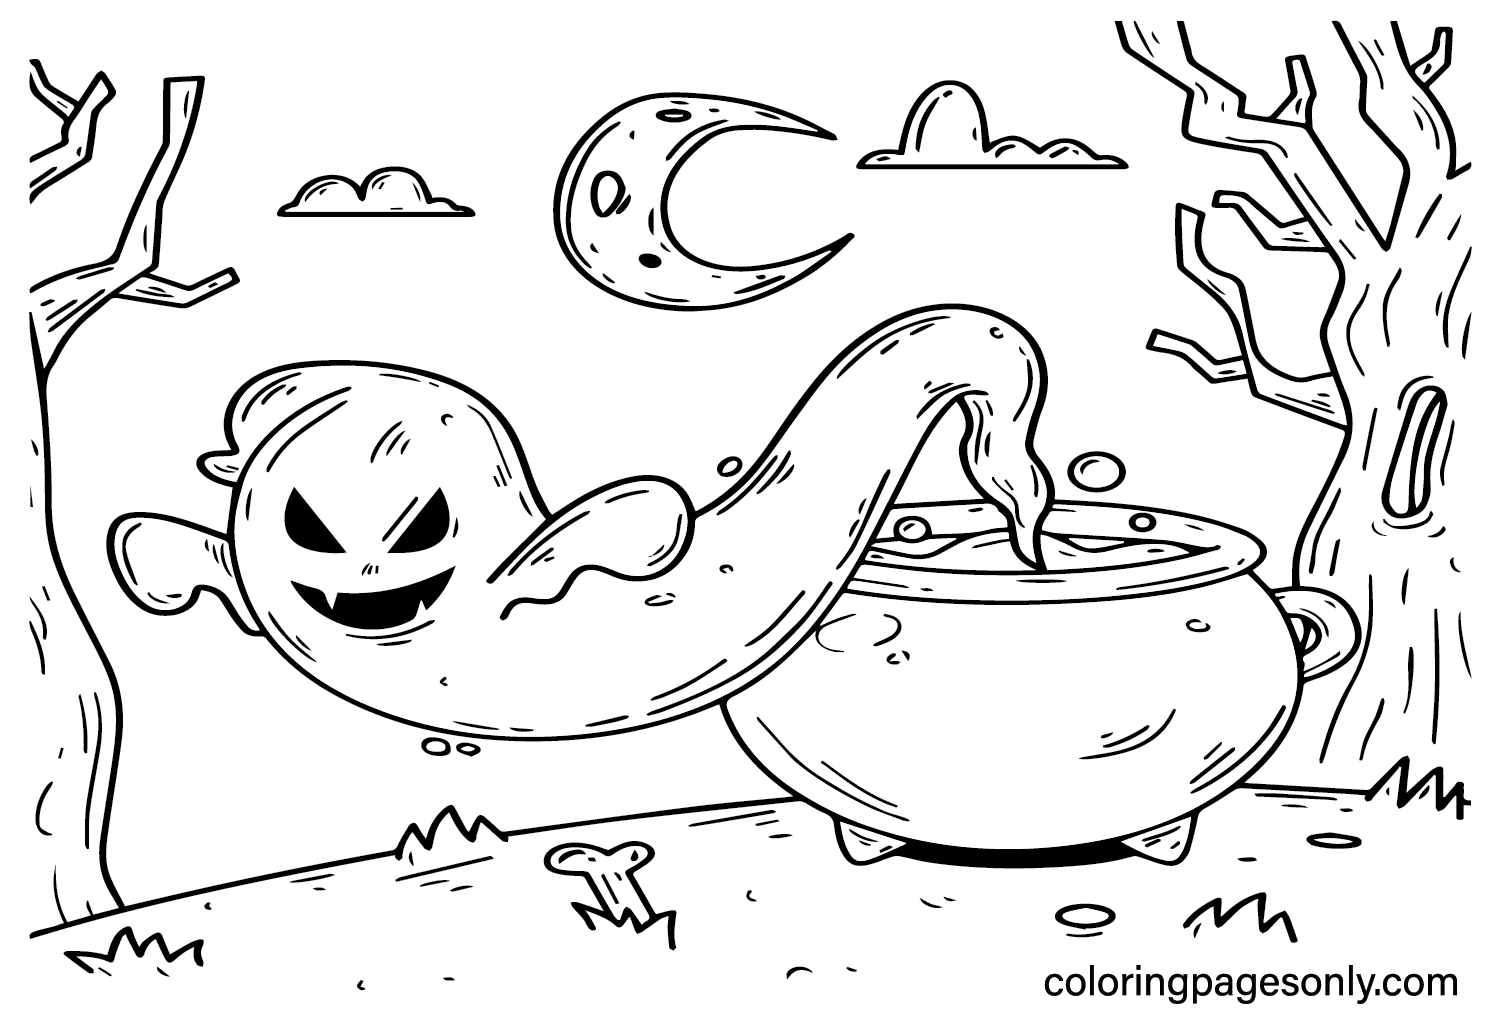 Scary Halloween Coloring Pages for Adults from Scary Halloween